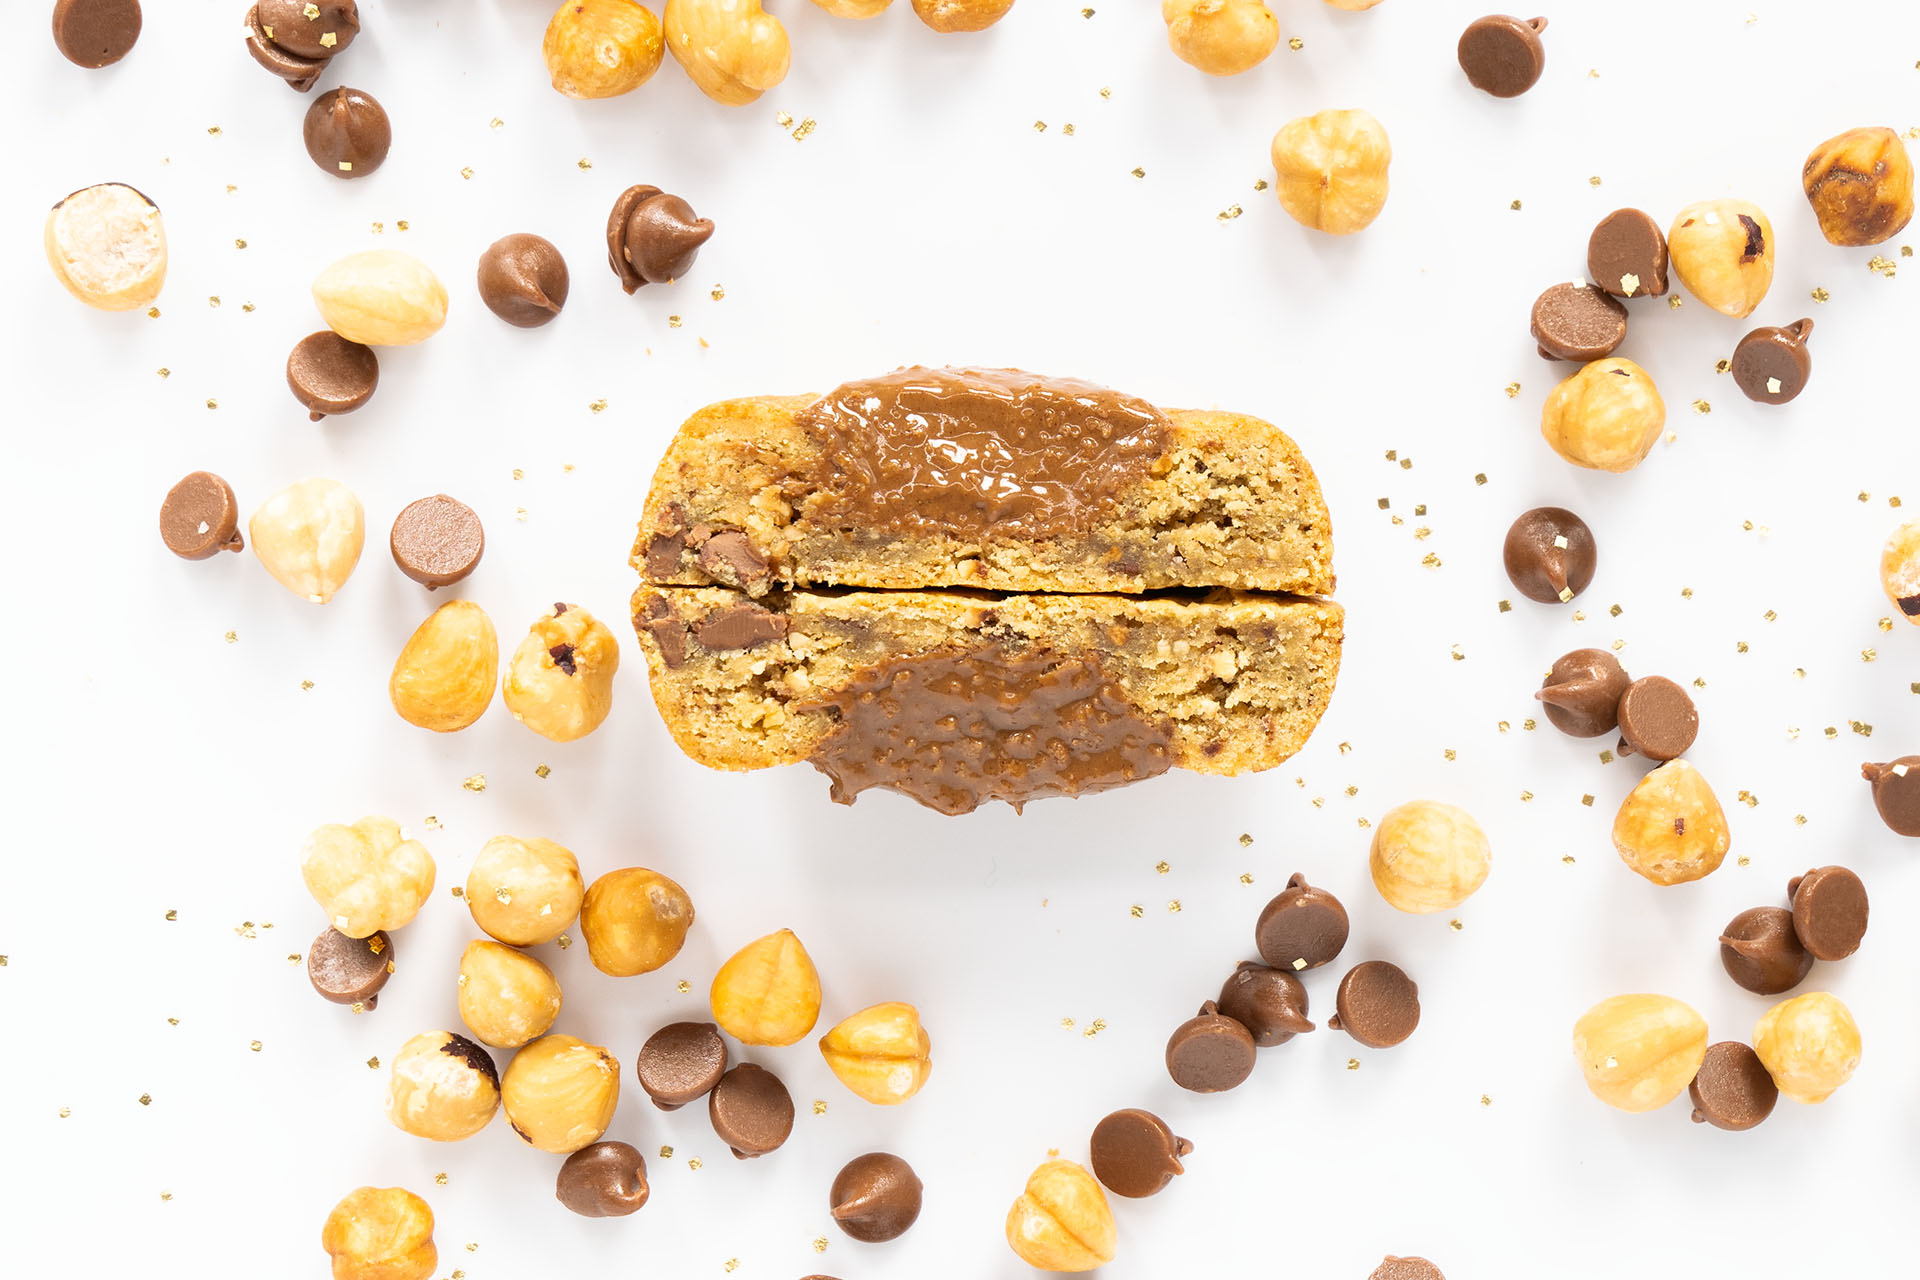 Sliced loaf of bread with caramel drizzle and espresso surrounded by nuts and chocolate chips on a white background.